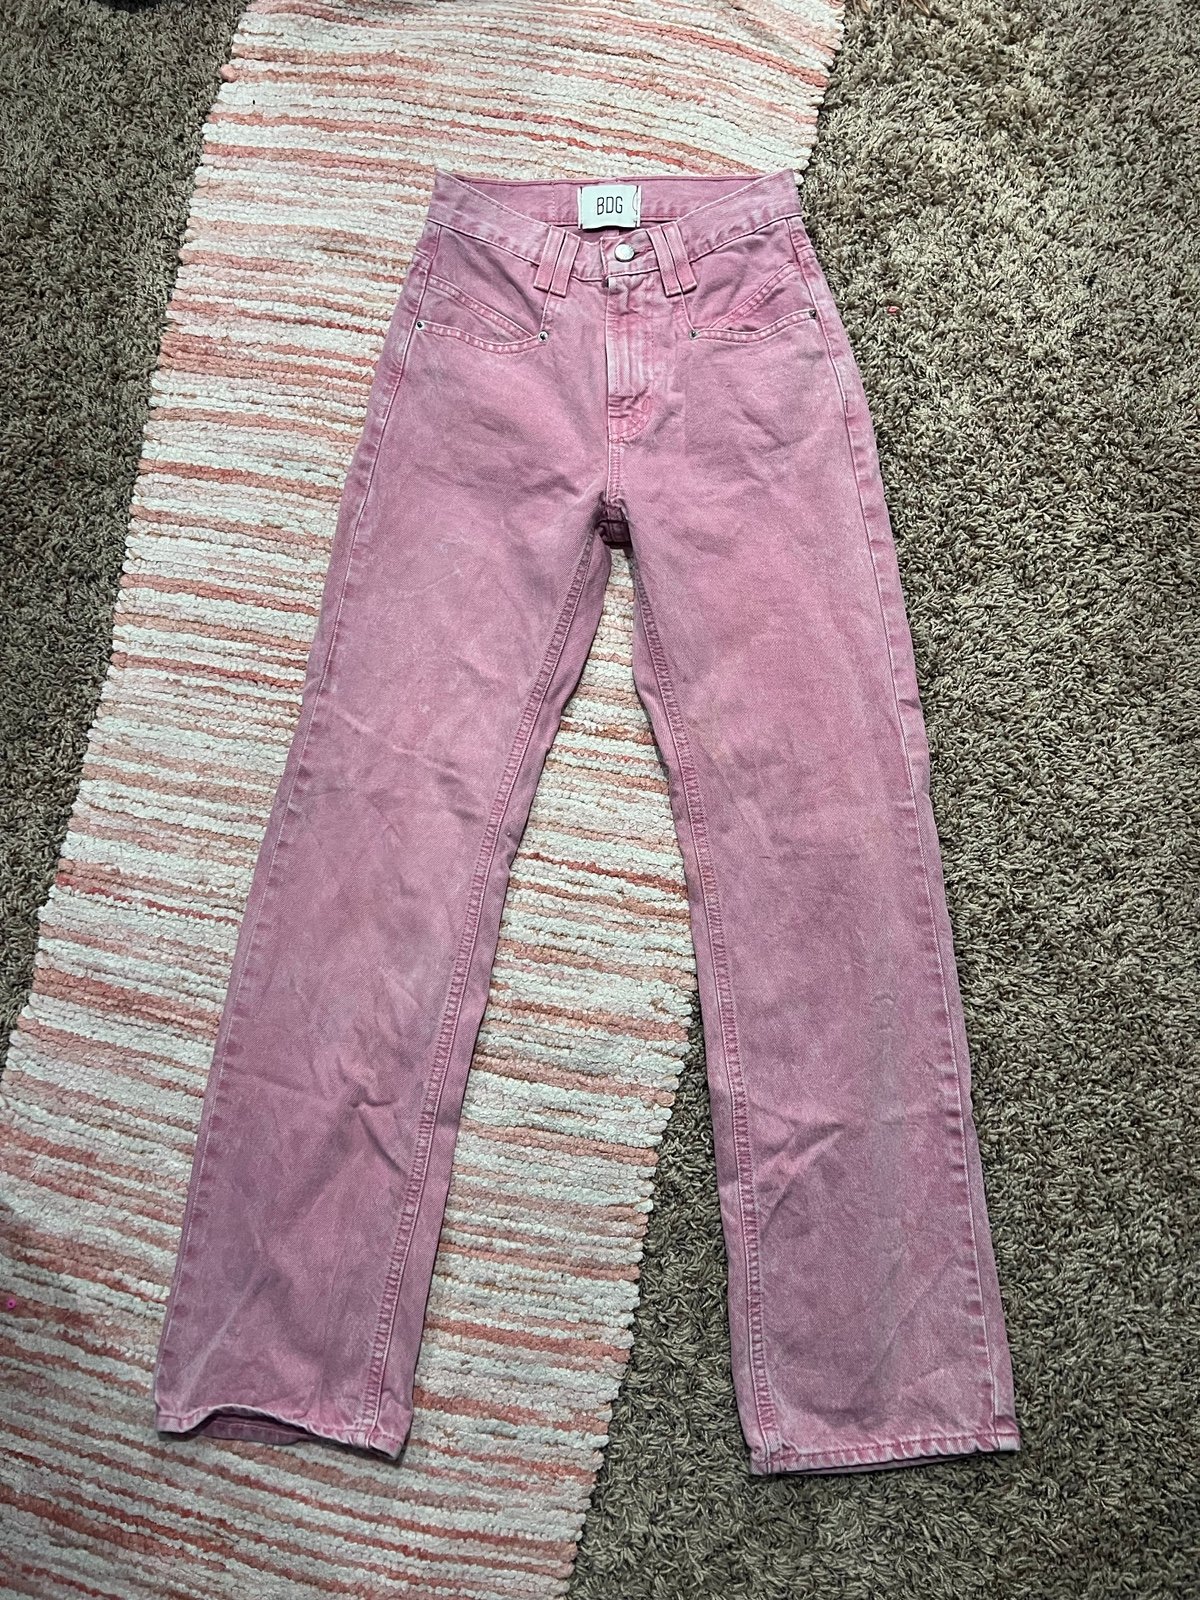 high discount BDG urban outfitter pink jeans size 24 fLfg4ESgP Buying Cheap